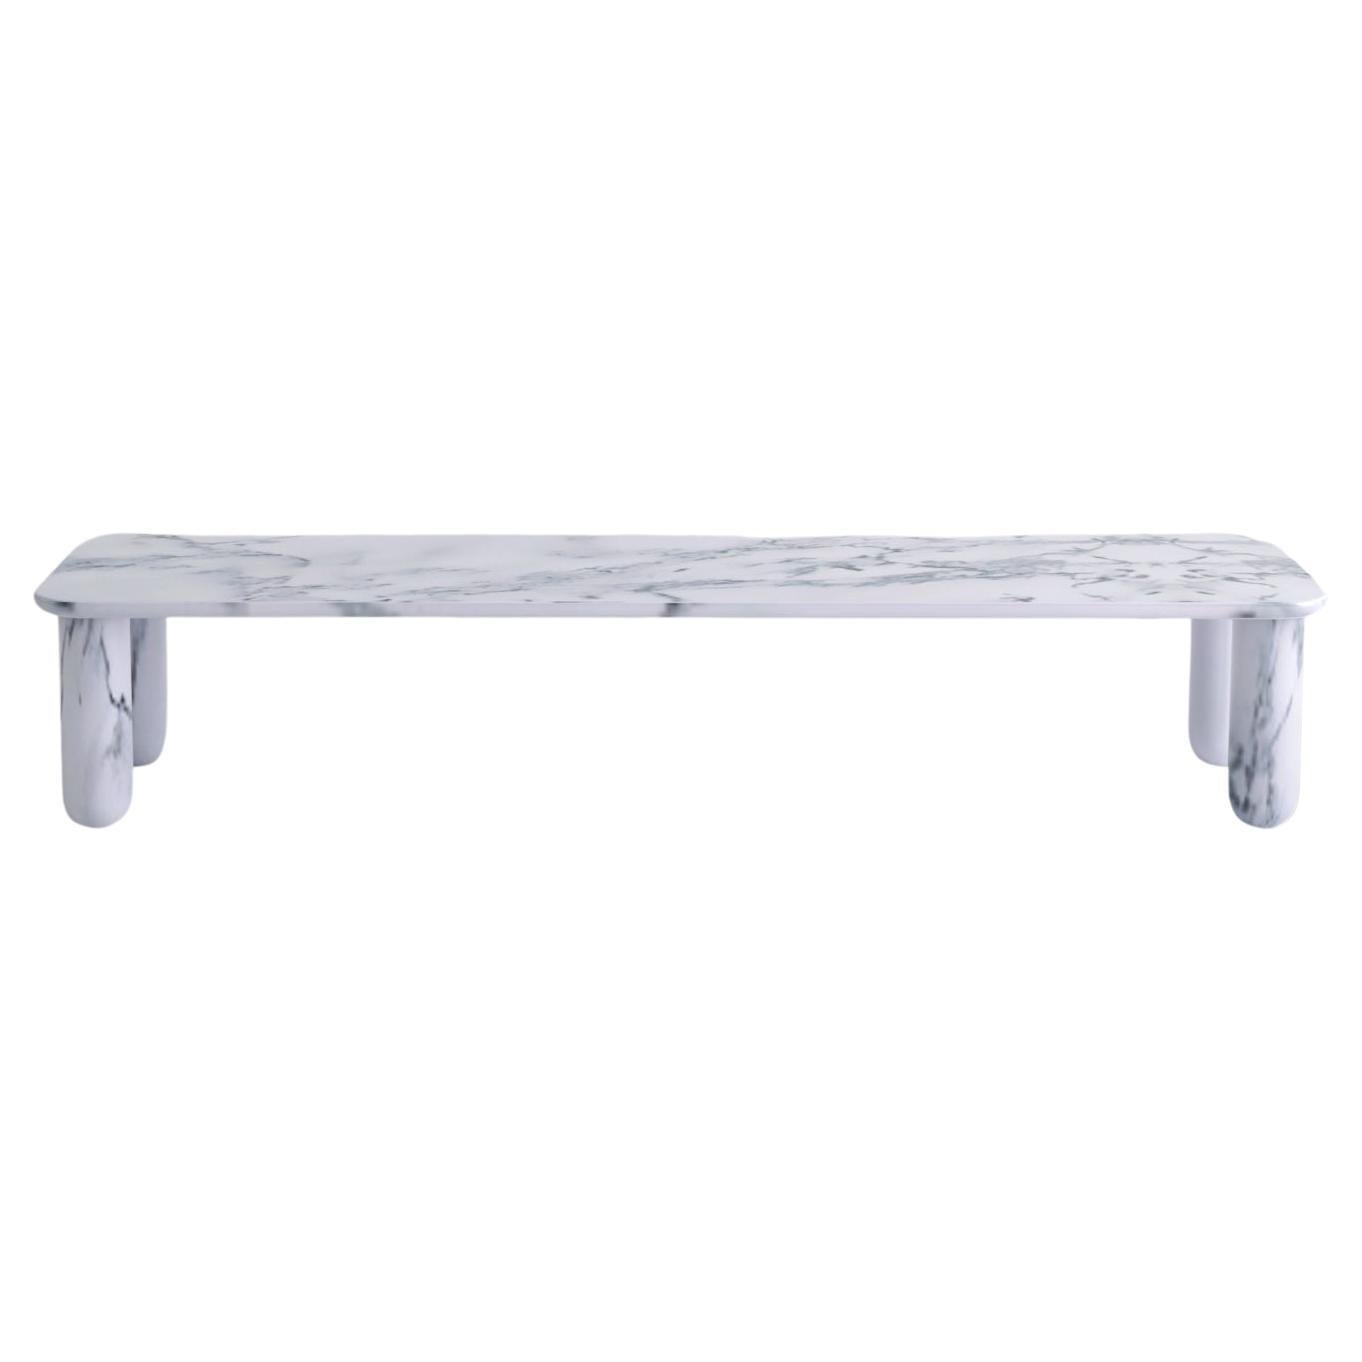 Large White Marble "Sunday" Coffee Table, Jean-Baptiste Souletie For Sale